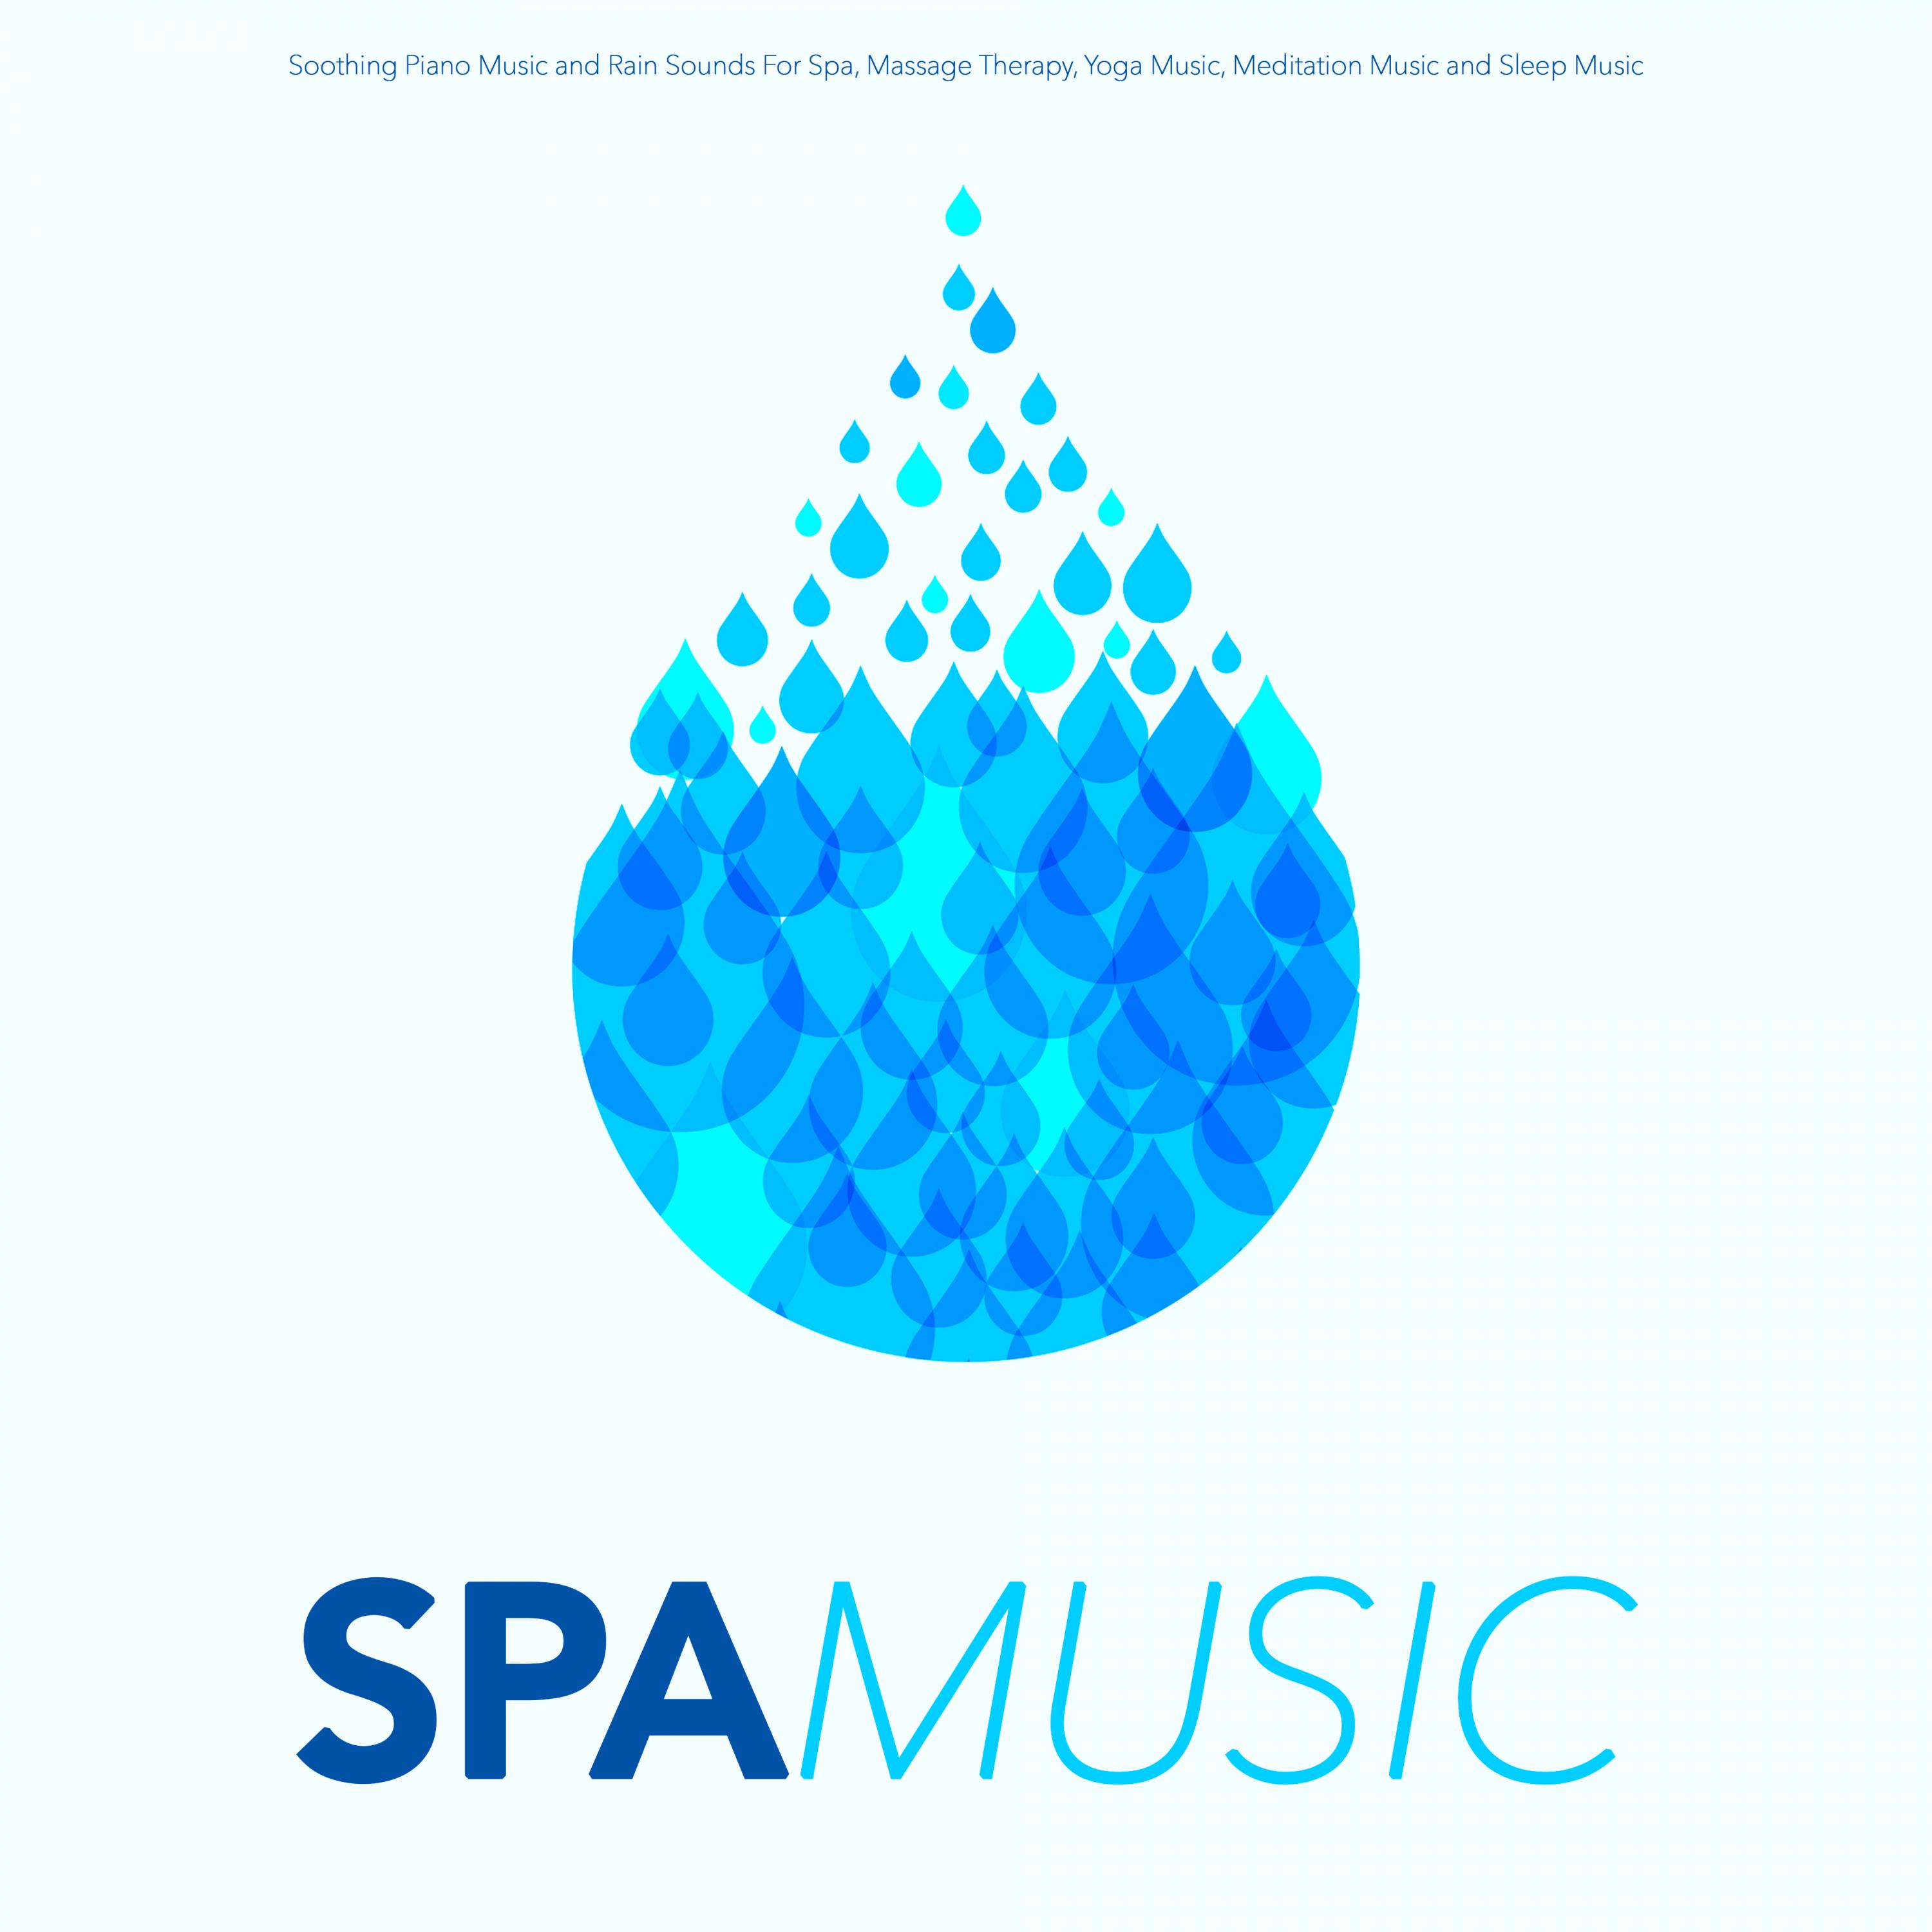 Piano Music With Rain Sounds For Spa